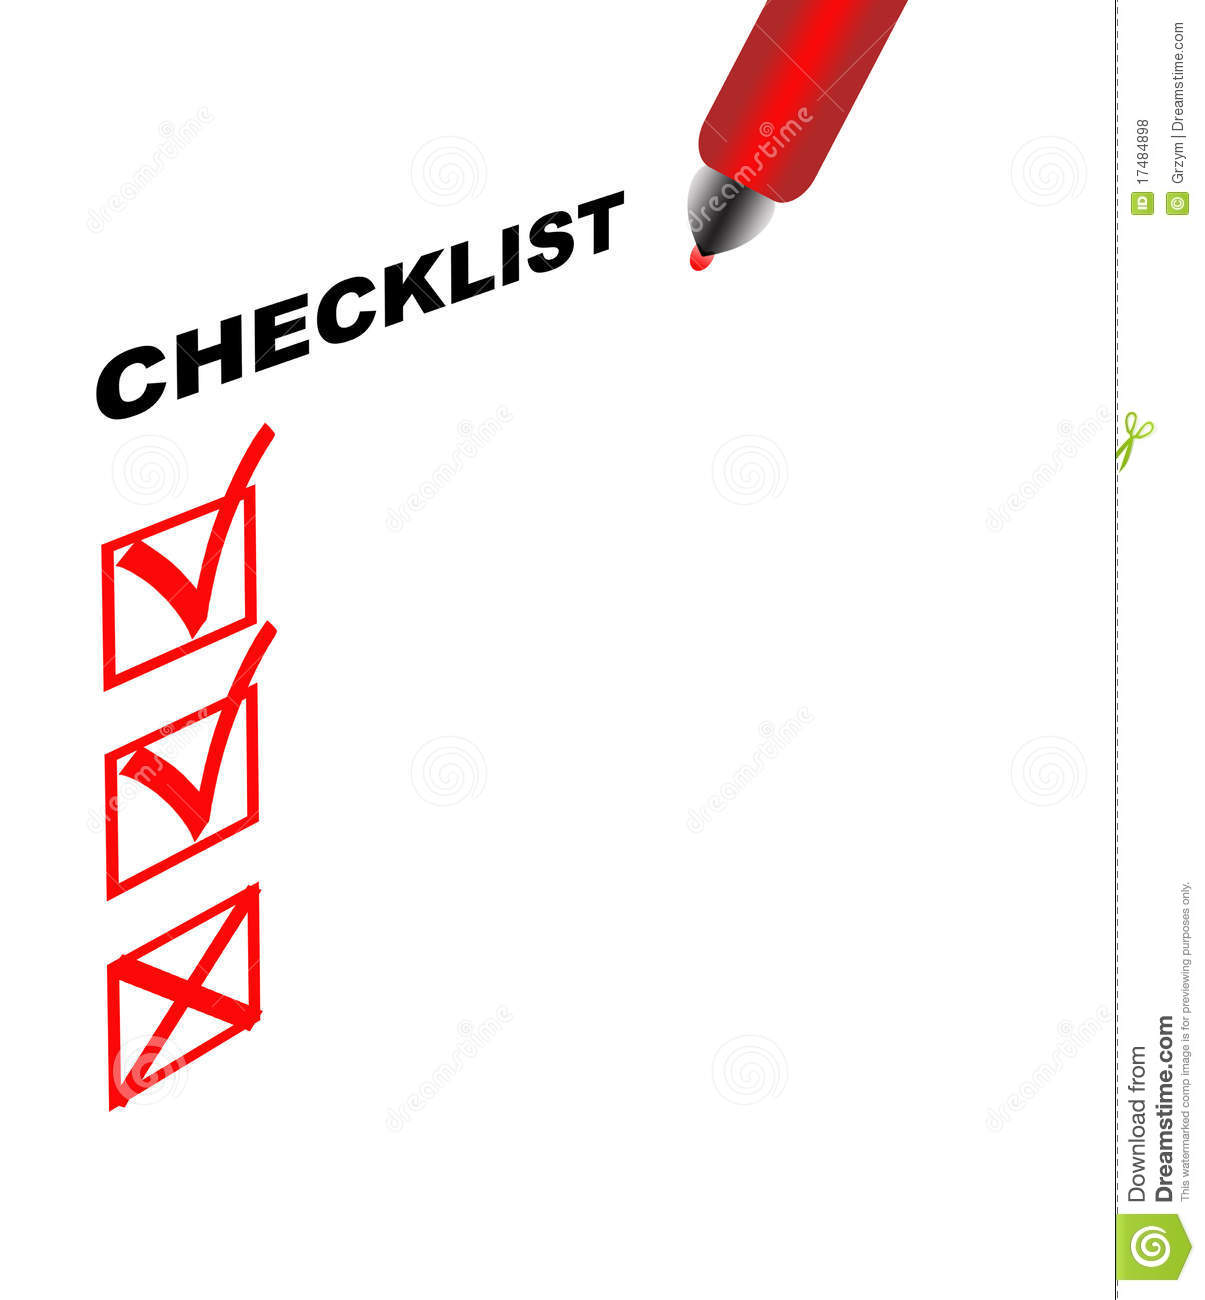 Checklist With Two Approve And One Unapproved Sign Signs And Pen On